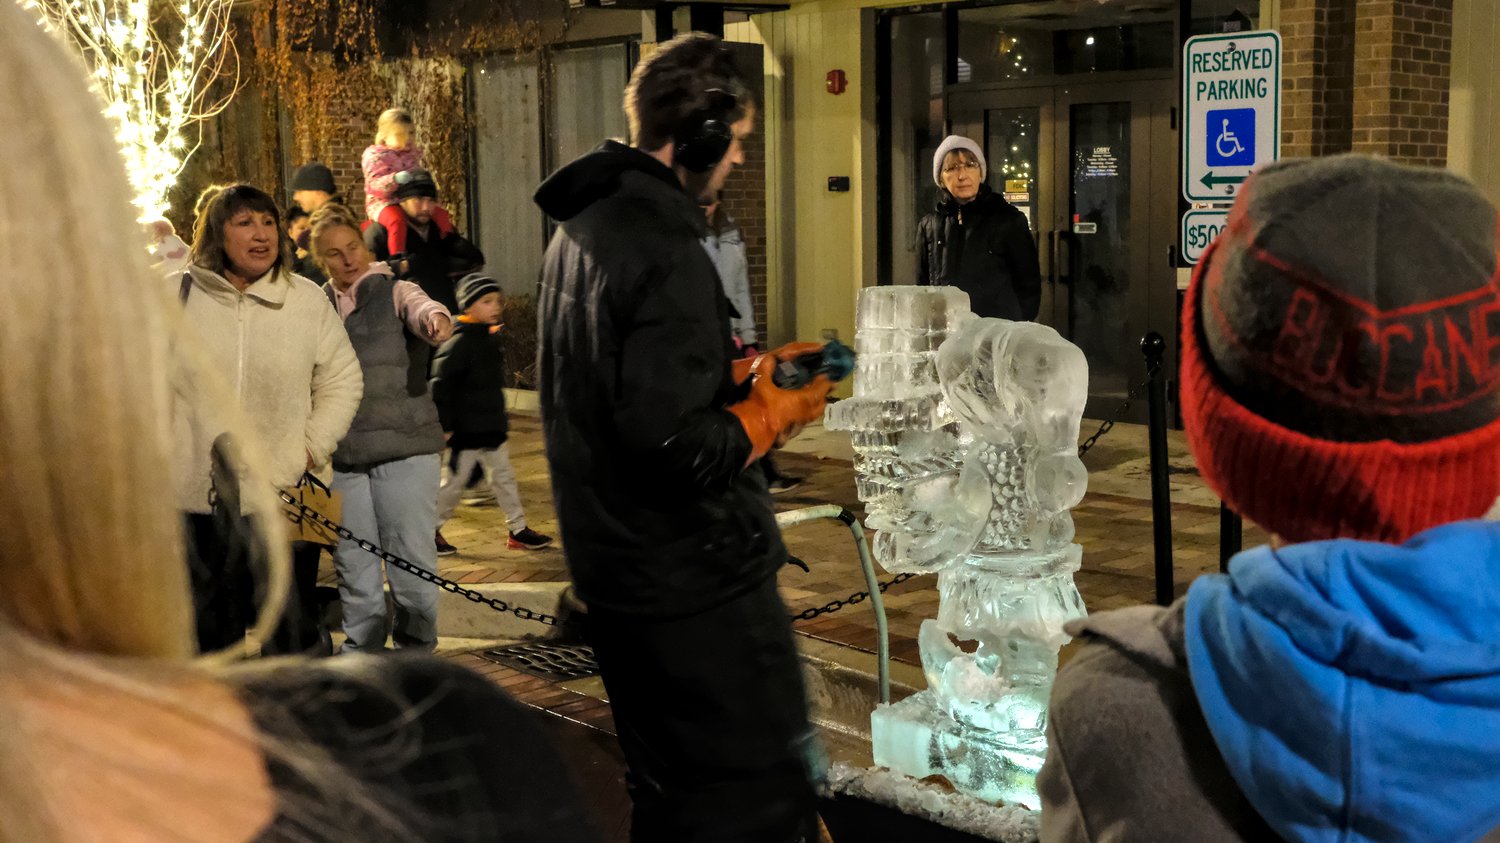 Ice sculptor carving an elf carrying packages.